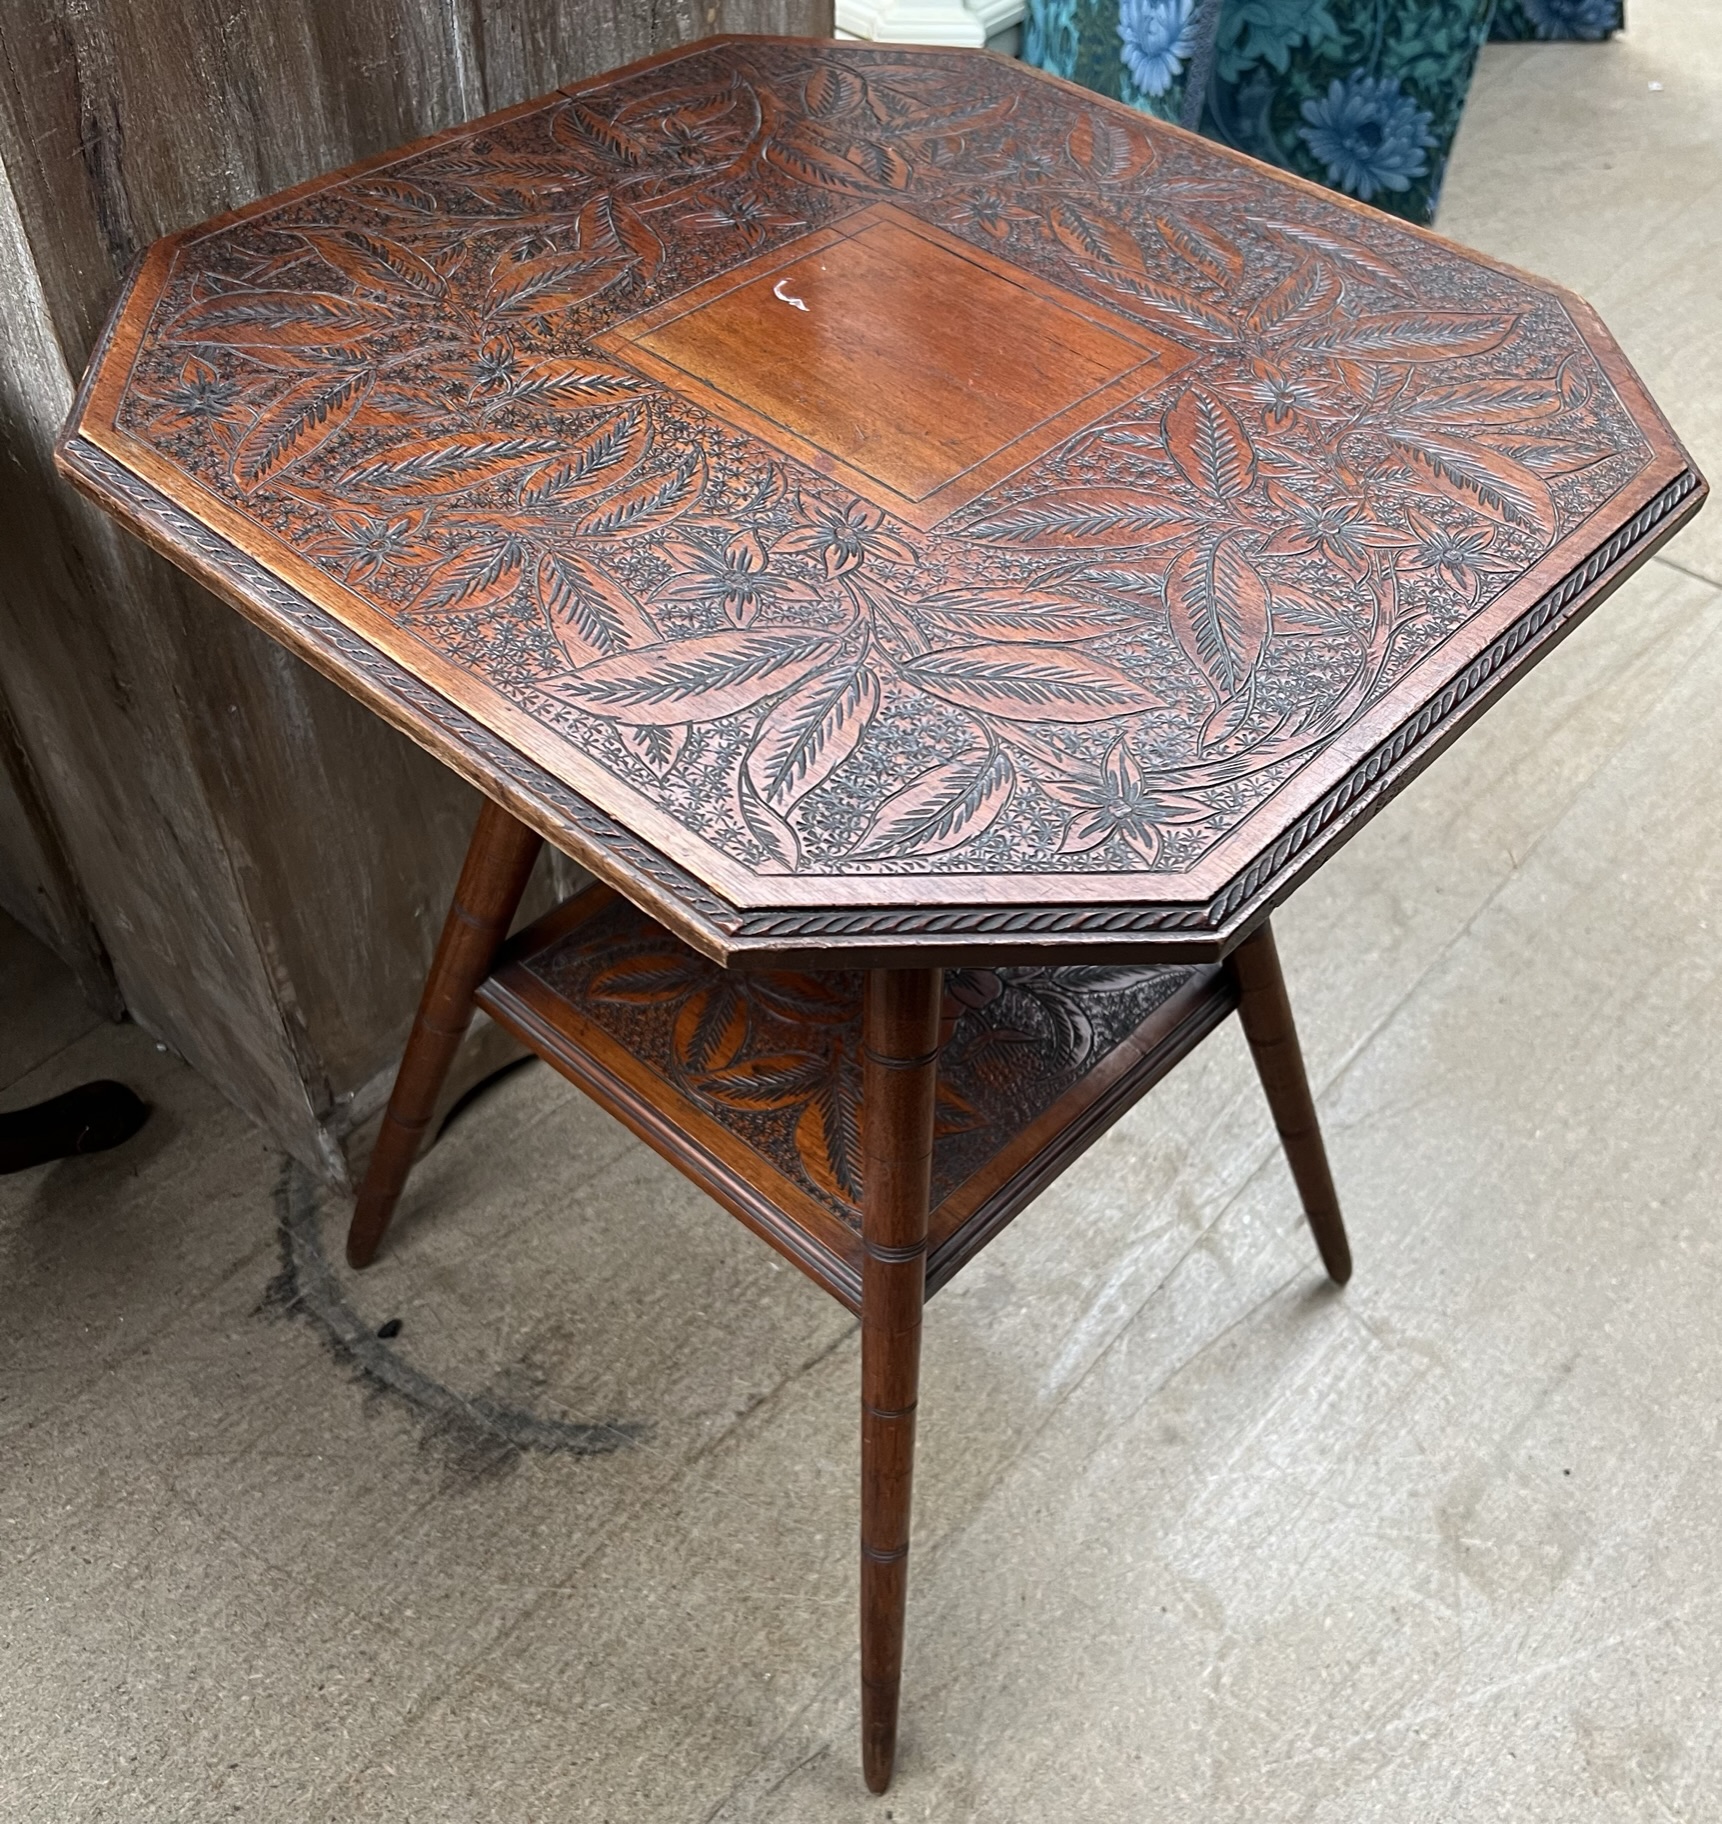 An Edwardian occasional table with a leaf carved square top and canted corners on four splayed legs